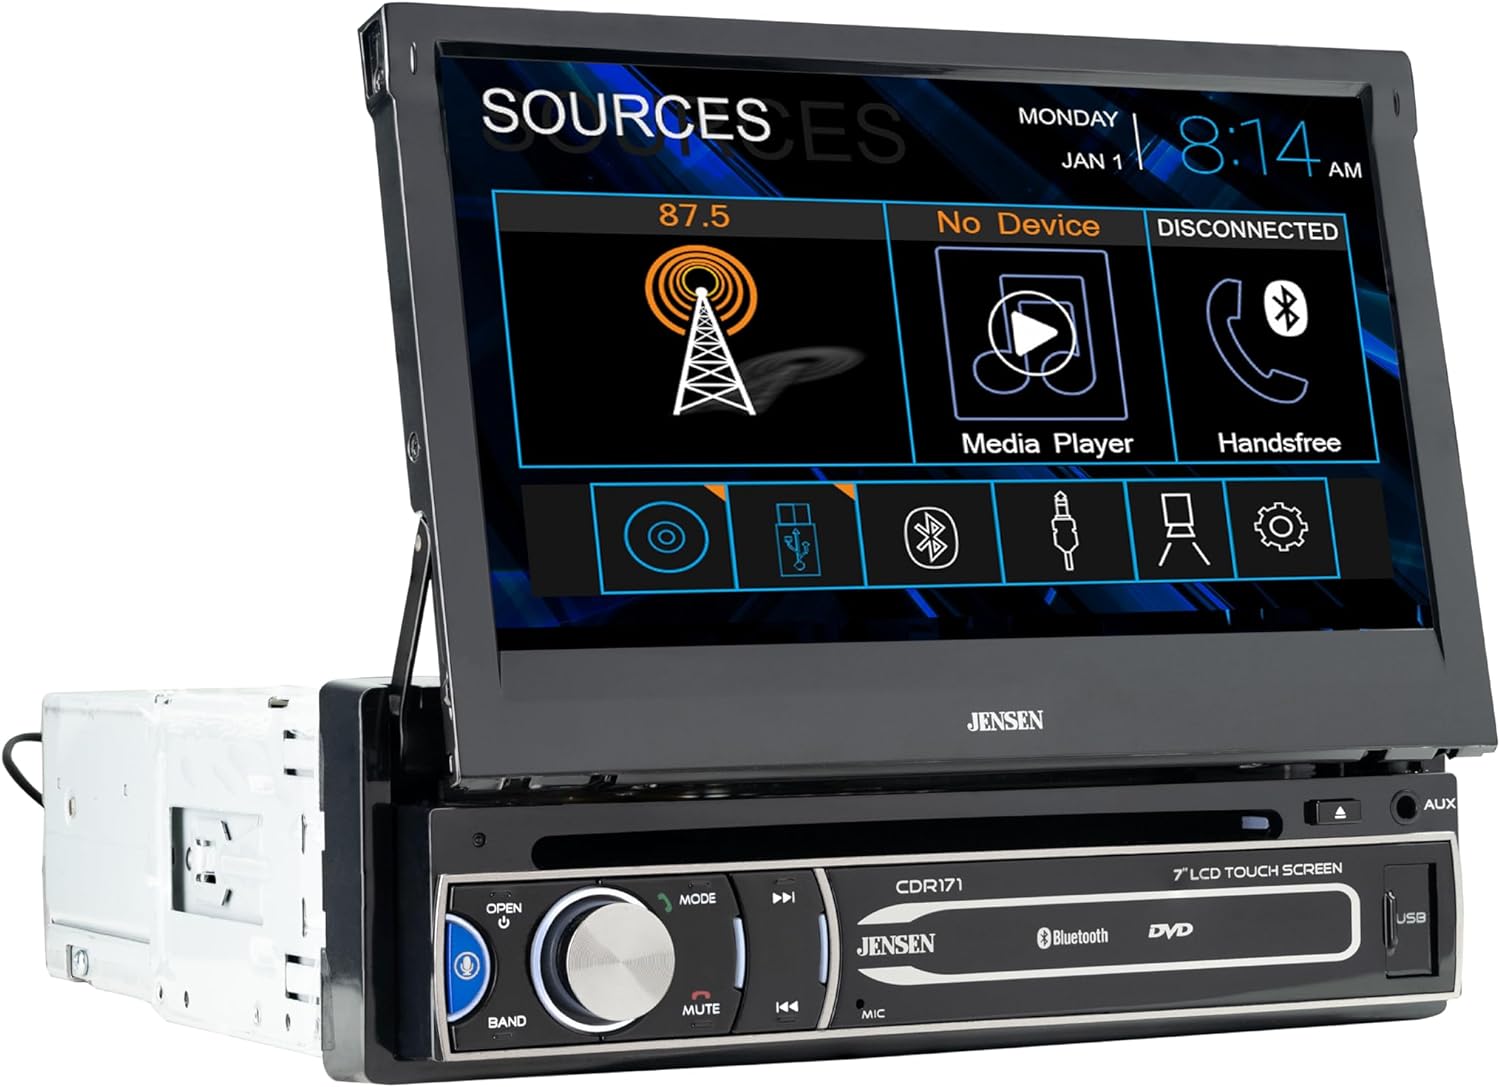 JENSEN CDR171 7 inch AM/FM Motorized Flip Out LED Media Touch Screen Single Din Car Stereo Radio | CD & DVD Player | Push to Talk Assistant | Bluetooth | Backup Camera Input | USB and 3.5mm AUX Inputs